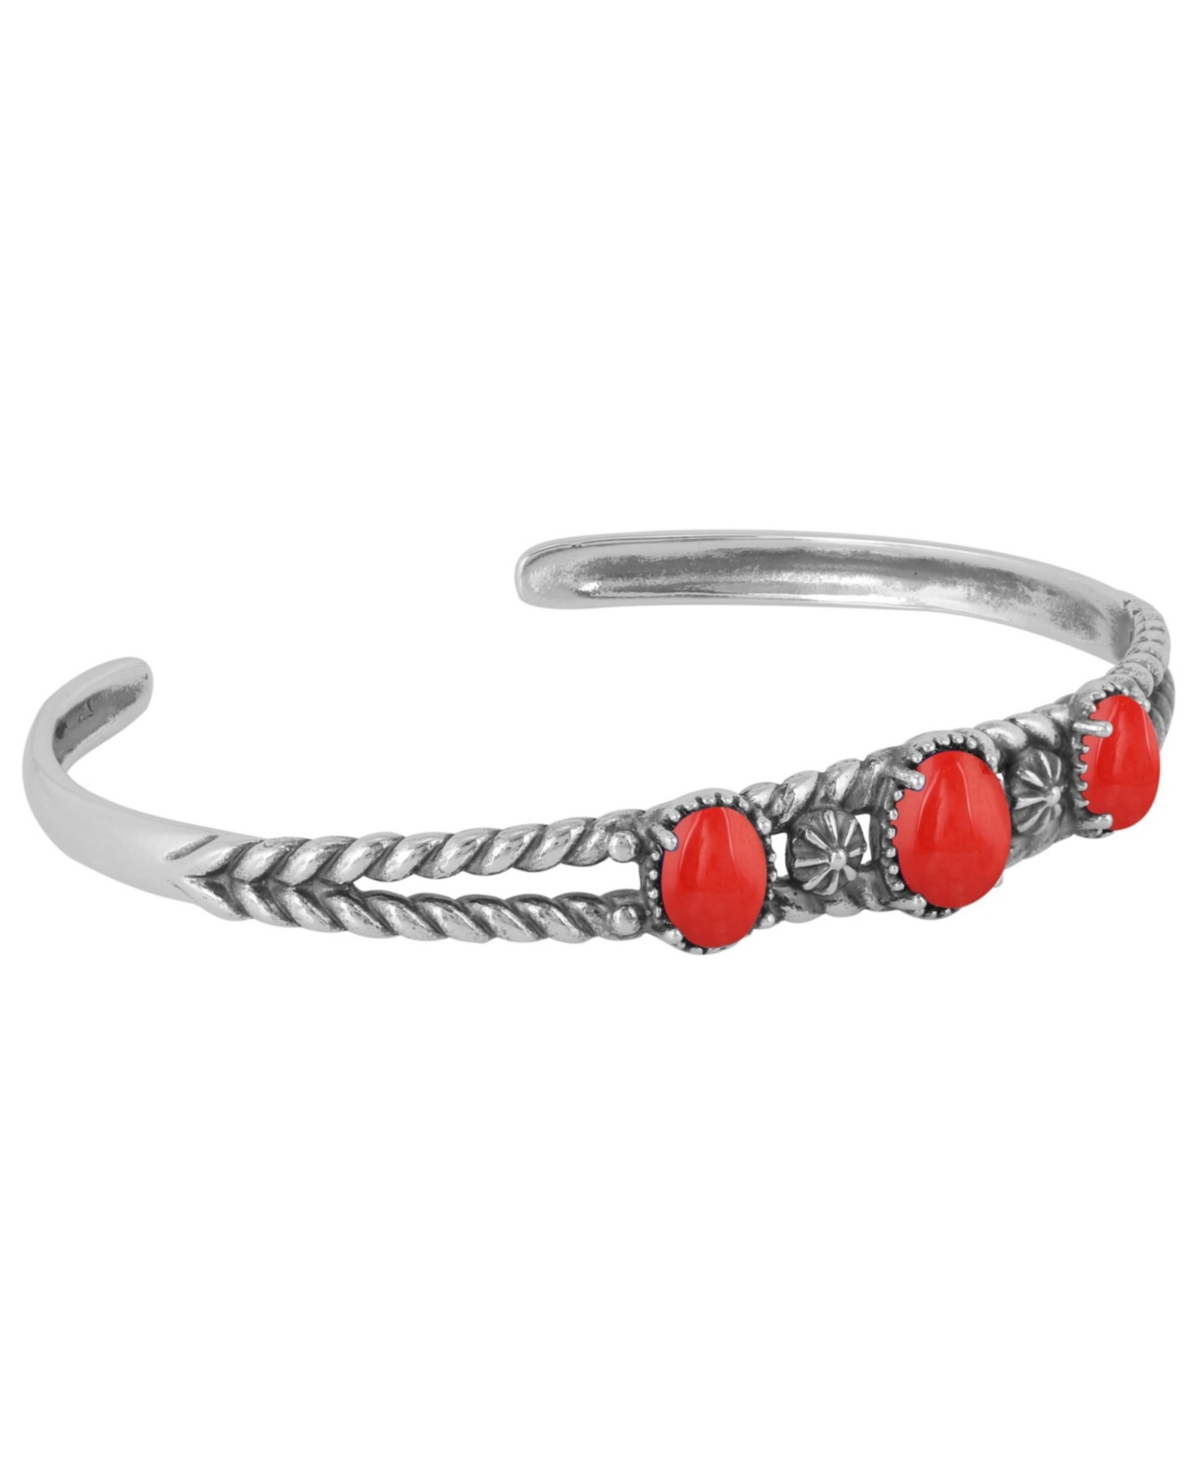 Sterling Silver Genuine Coral 3 Stone Cuff Bracelet Size Small - Large - Red coral